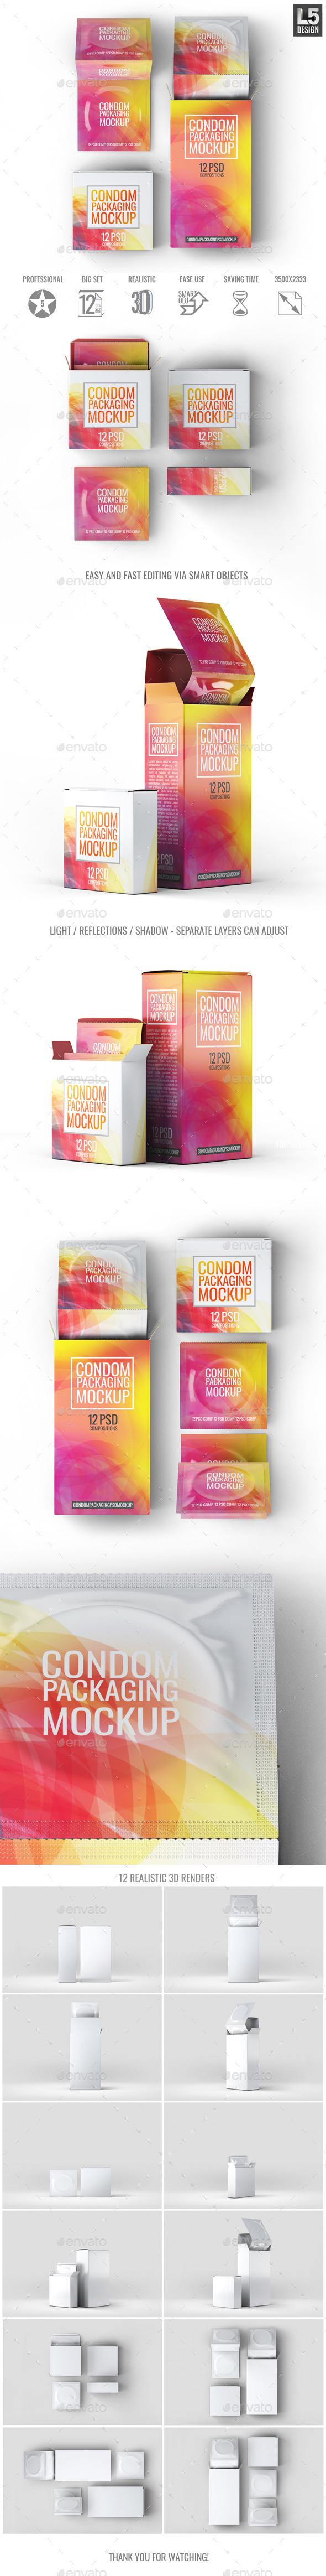 Download Condoms Packaging Mock-Up by L5Design | GraphicRiver